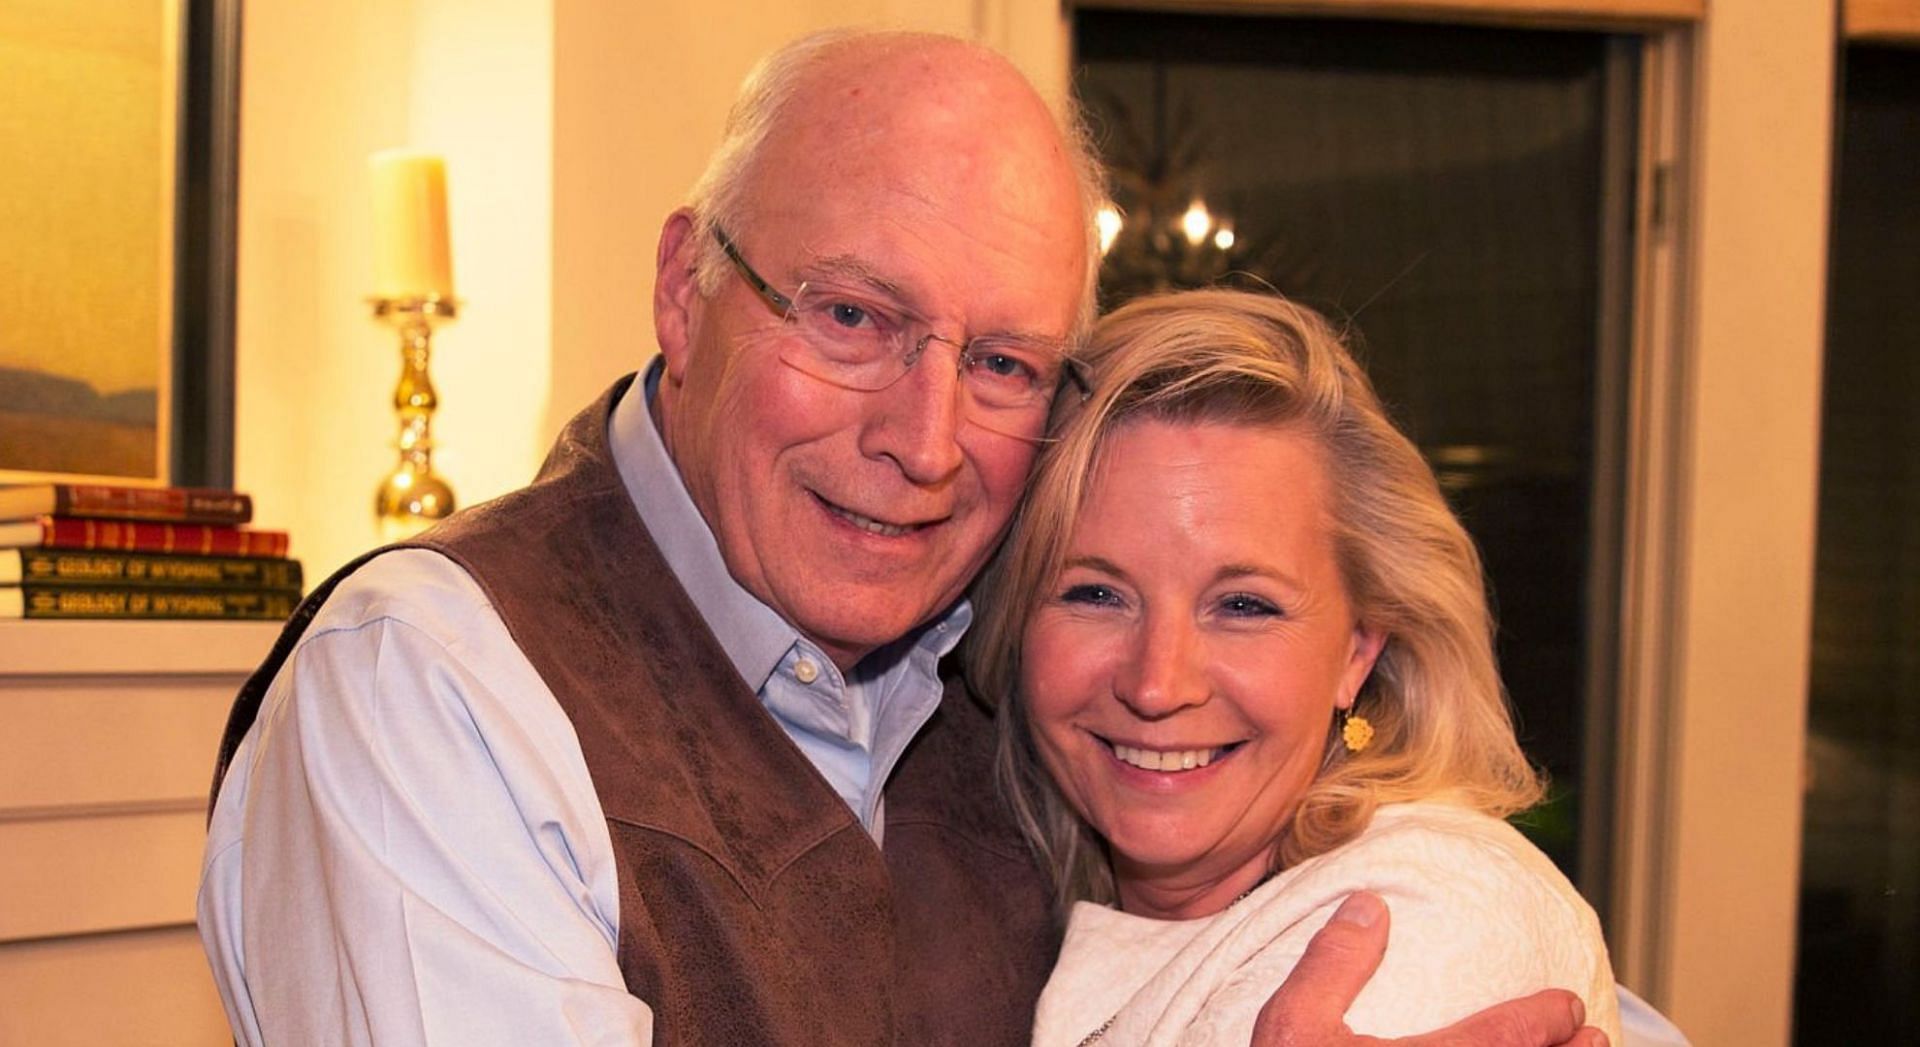 Dick Cheney recently slammed Donald Trump while appearing in a campaign ad for his daughter Liz Cheney (Image via David Hume Kennerly via GettyImages)